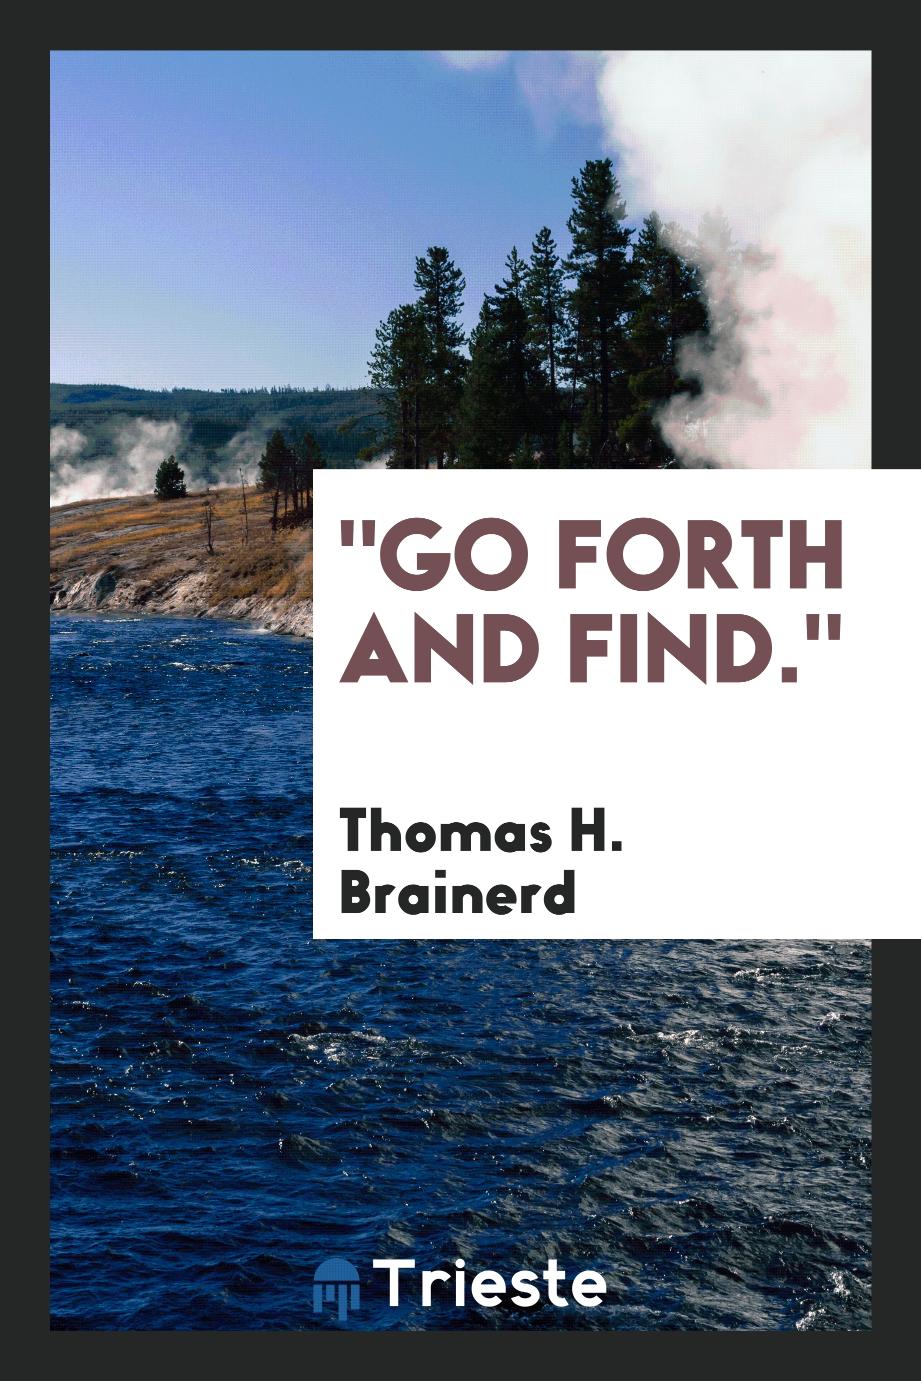 "Go forth and find."